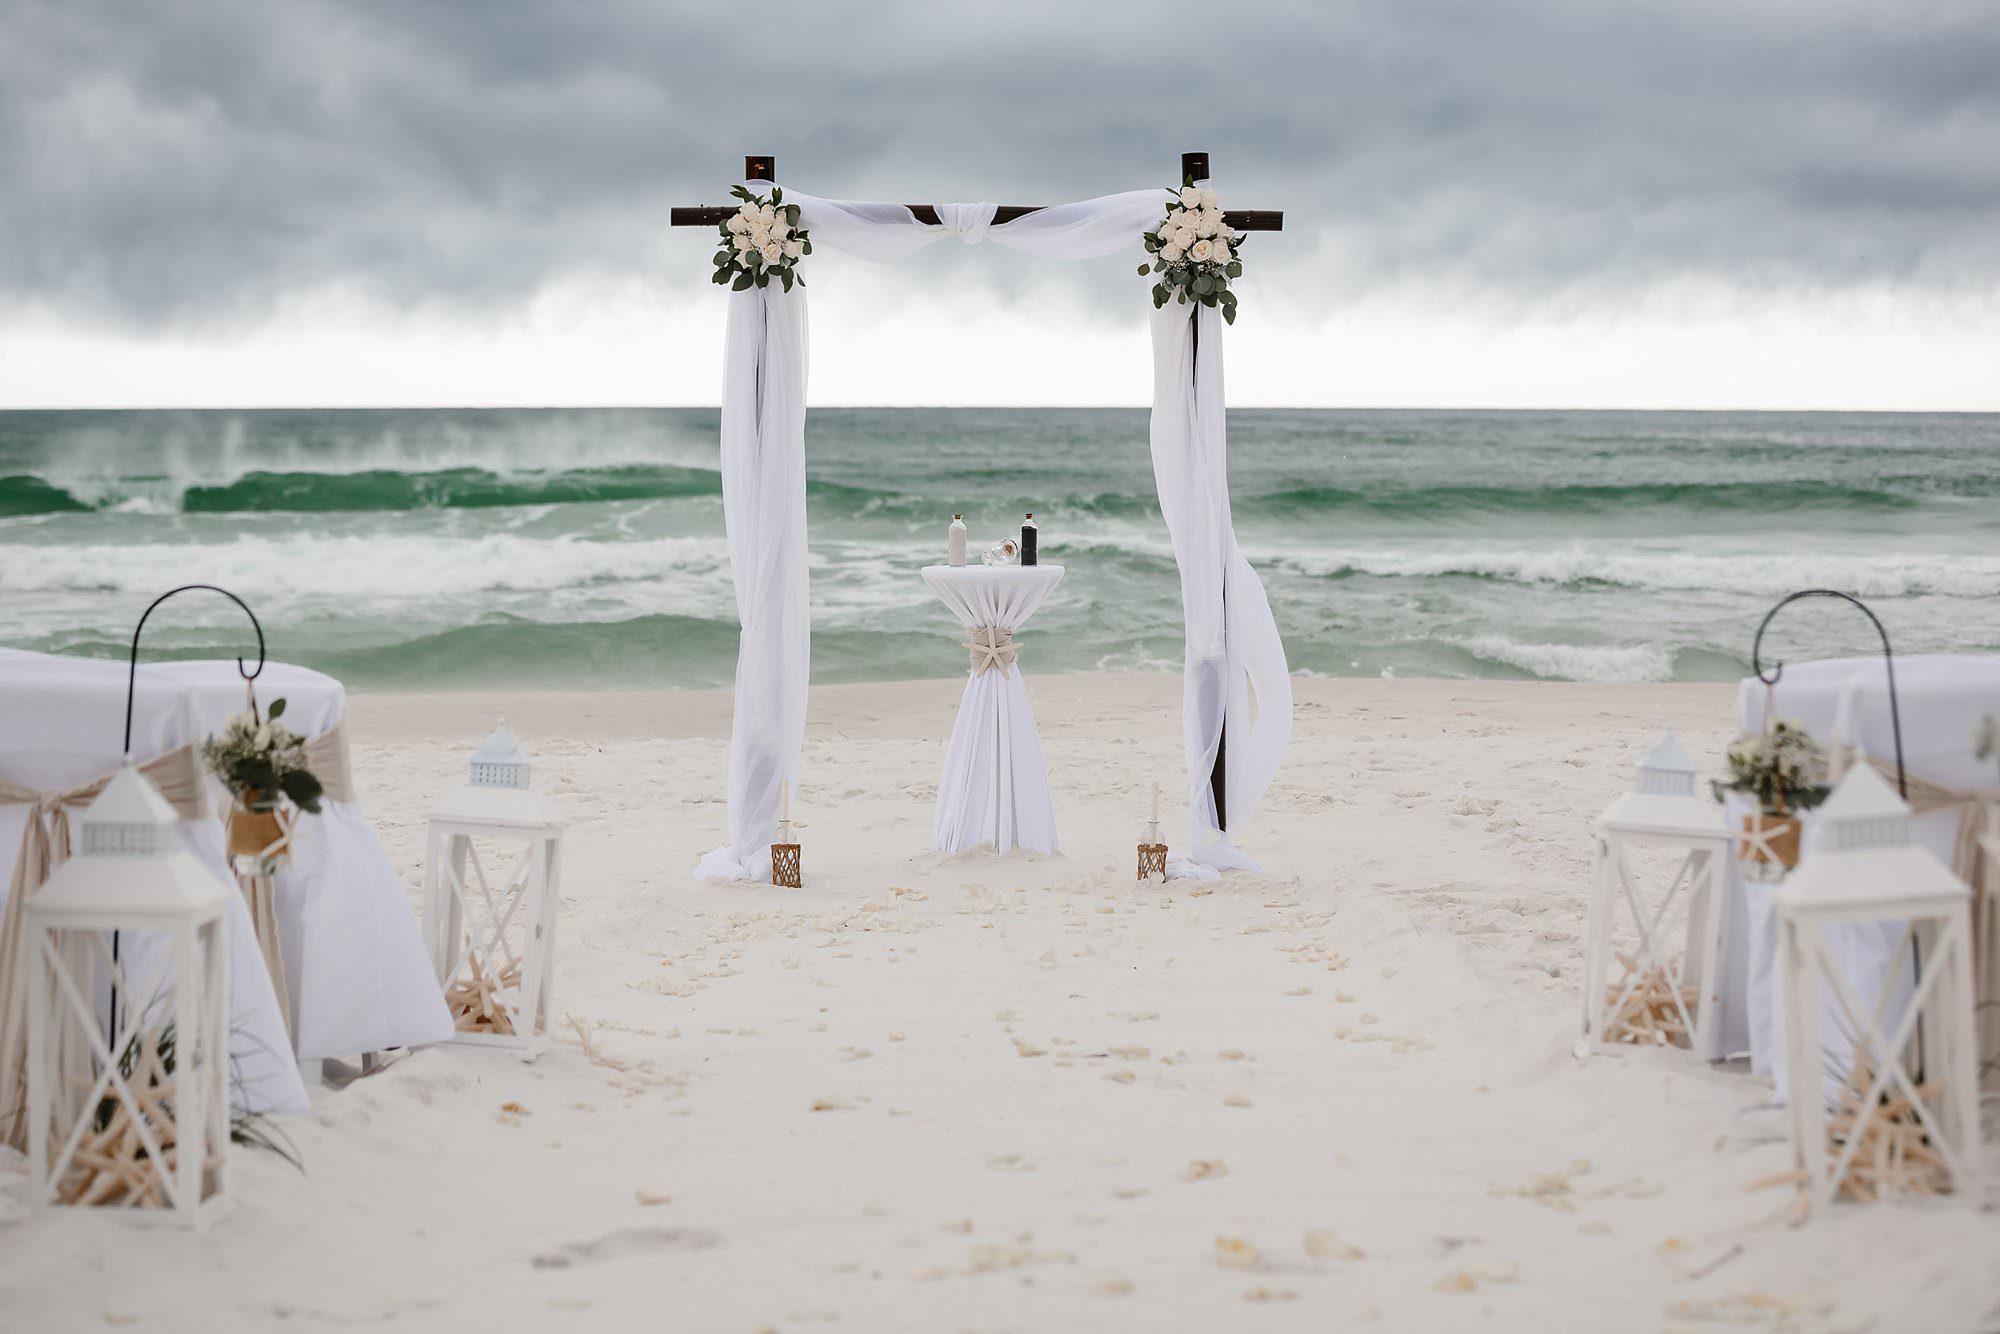 Beach wedding decor of bamboo arbor white roses lanterns white linen covered chairs facing dark storm clouds and white capped waves on Henderson Beach in Destin Florida